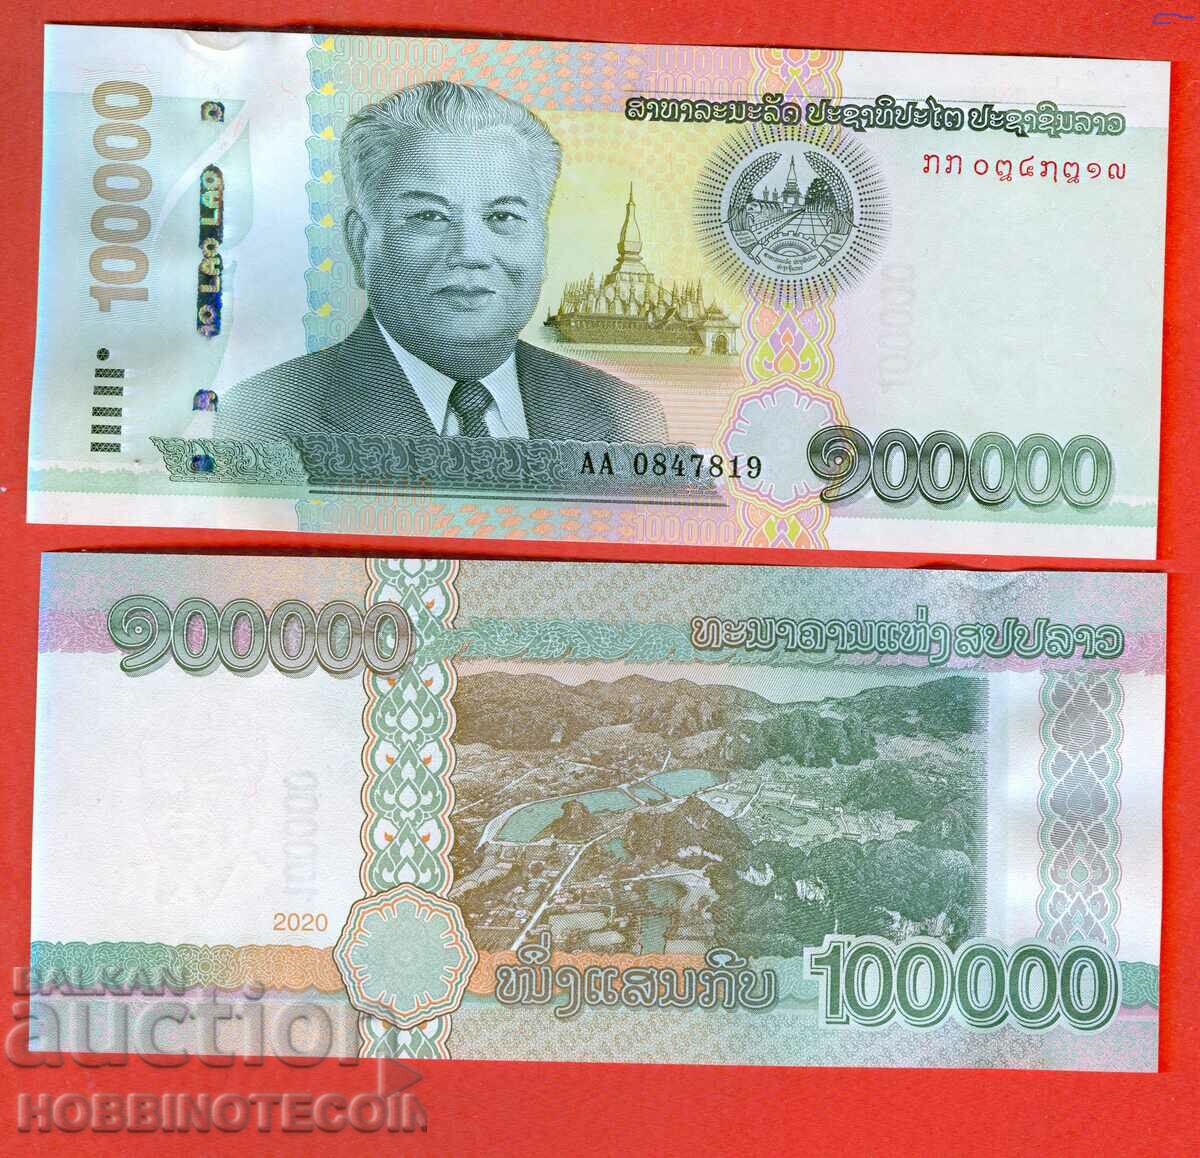 LAOS LAO 100000 100 000 Kip issue issue 2020 2022 NEW UNC